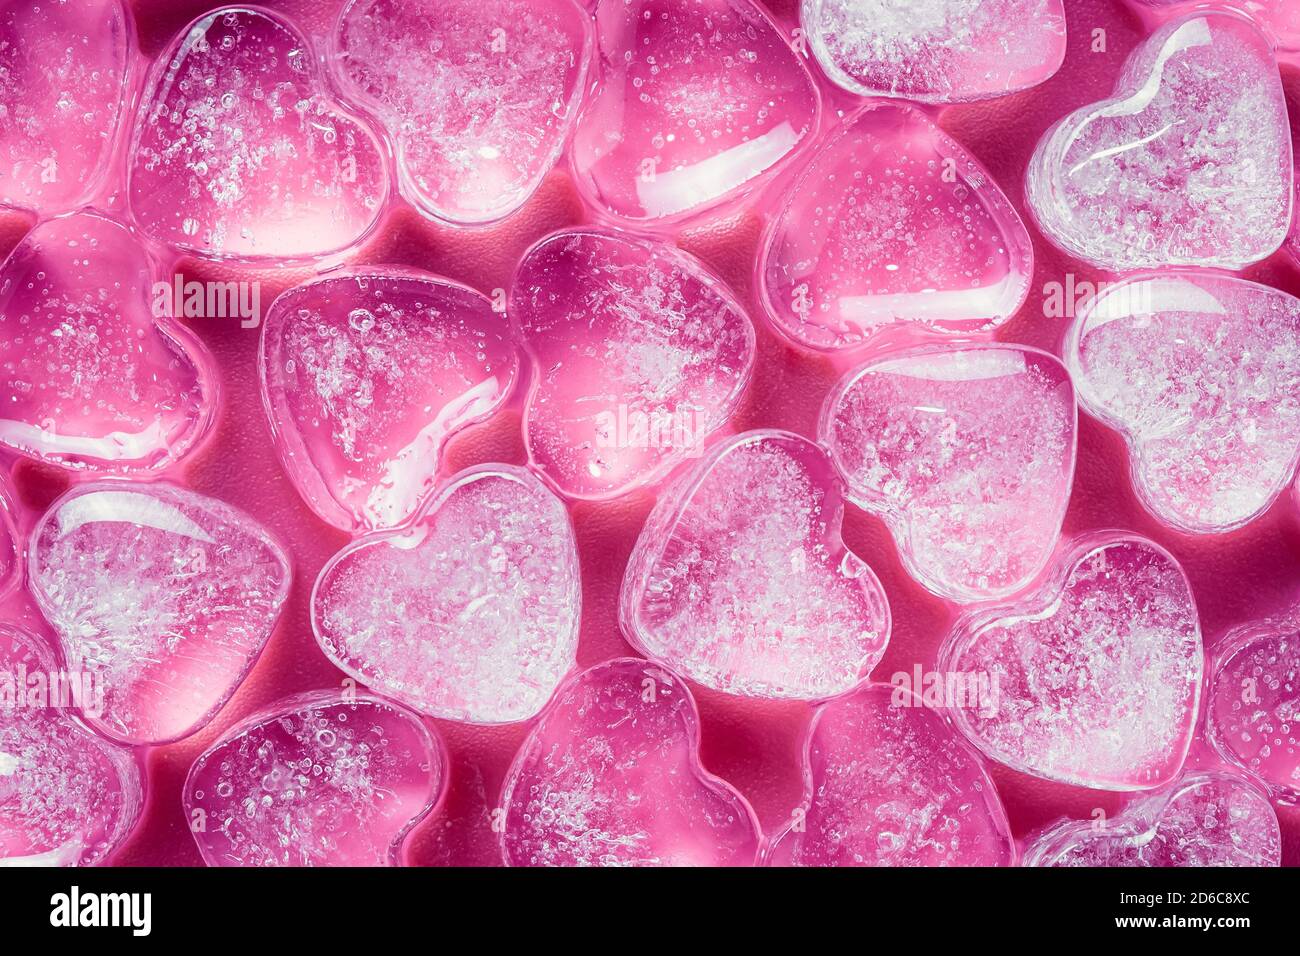 Download White And Pastel Pink Heart Candies Wallpaper  Wallpaperscom